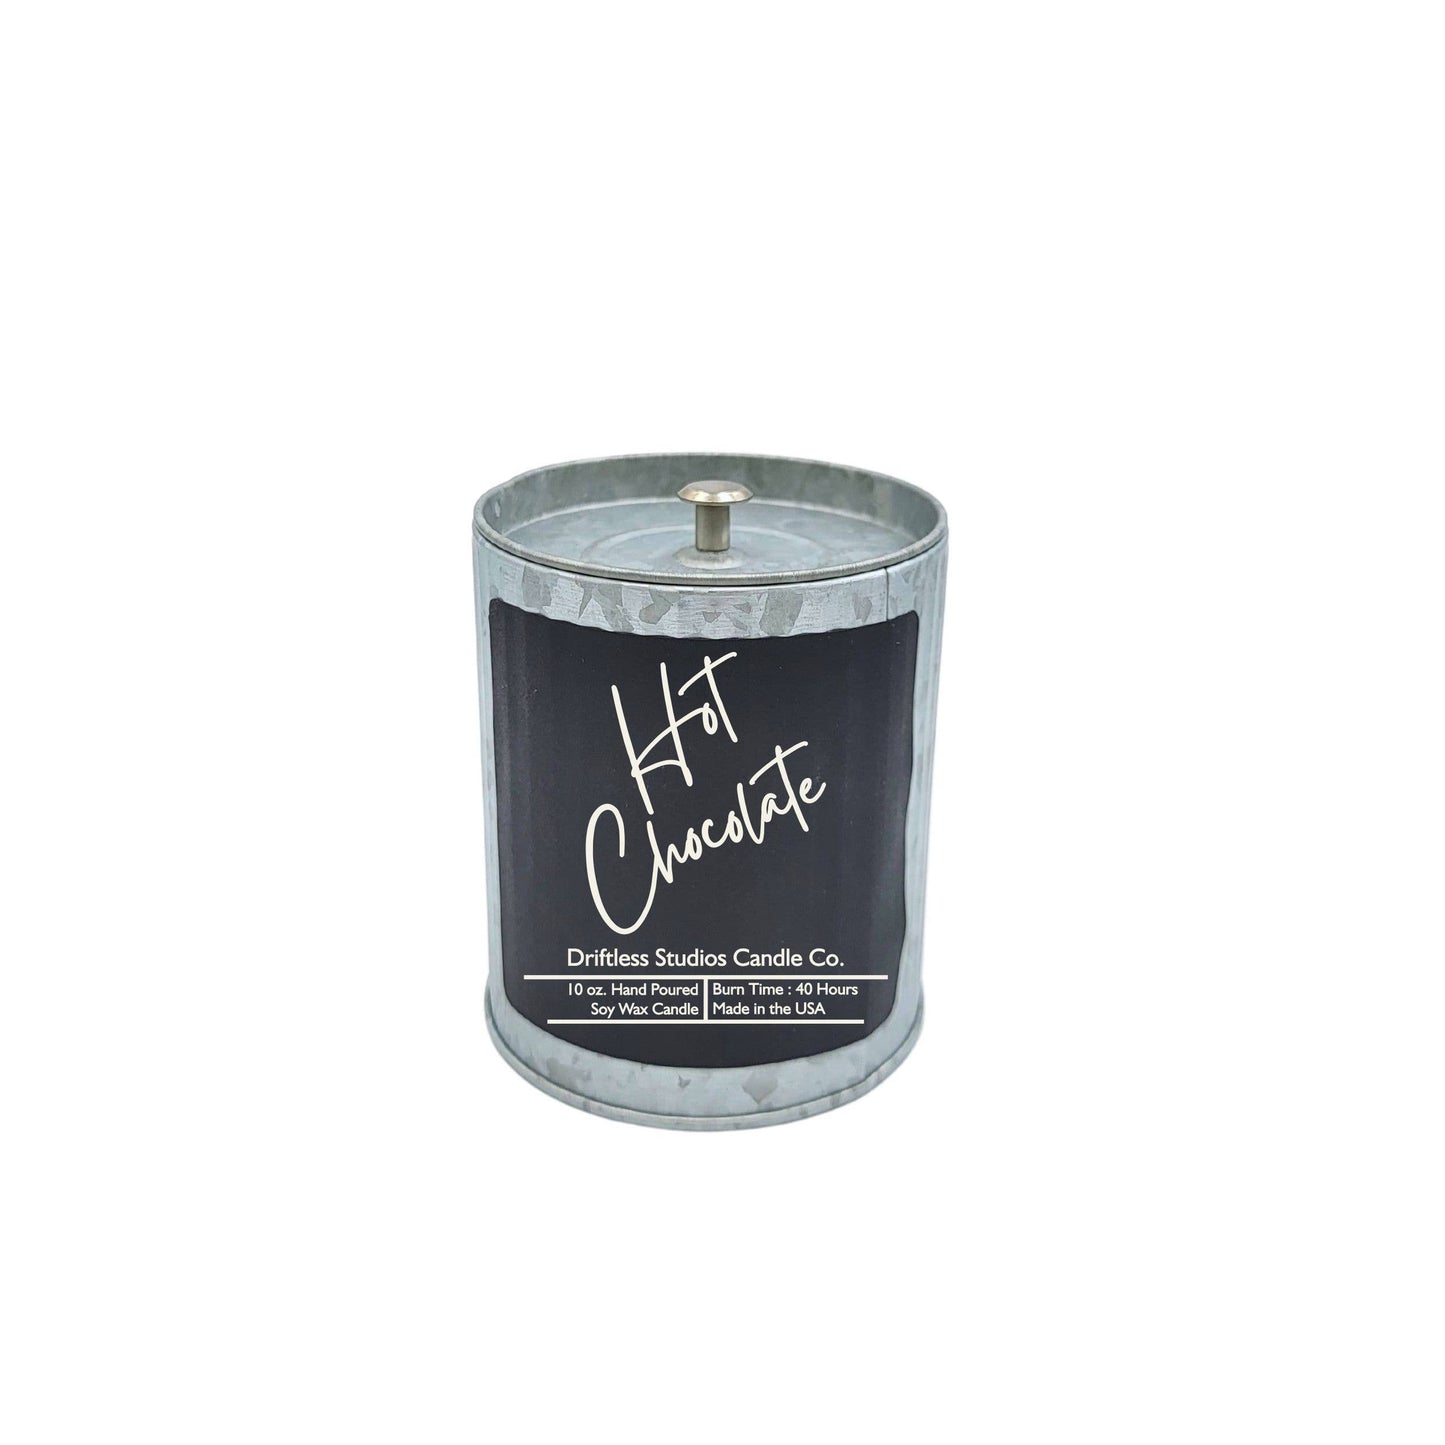 Hot Chocolate Soy Wax Candle